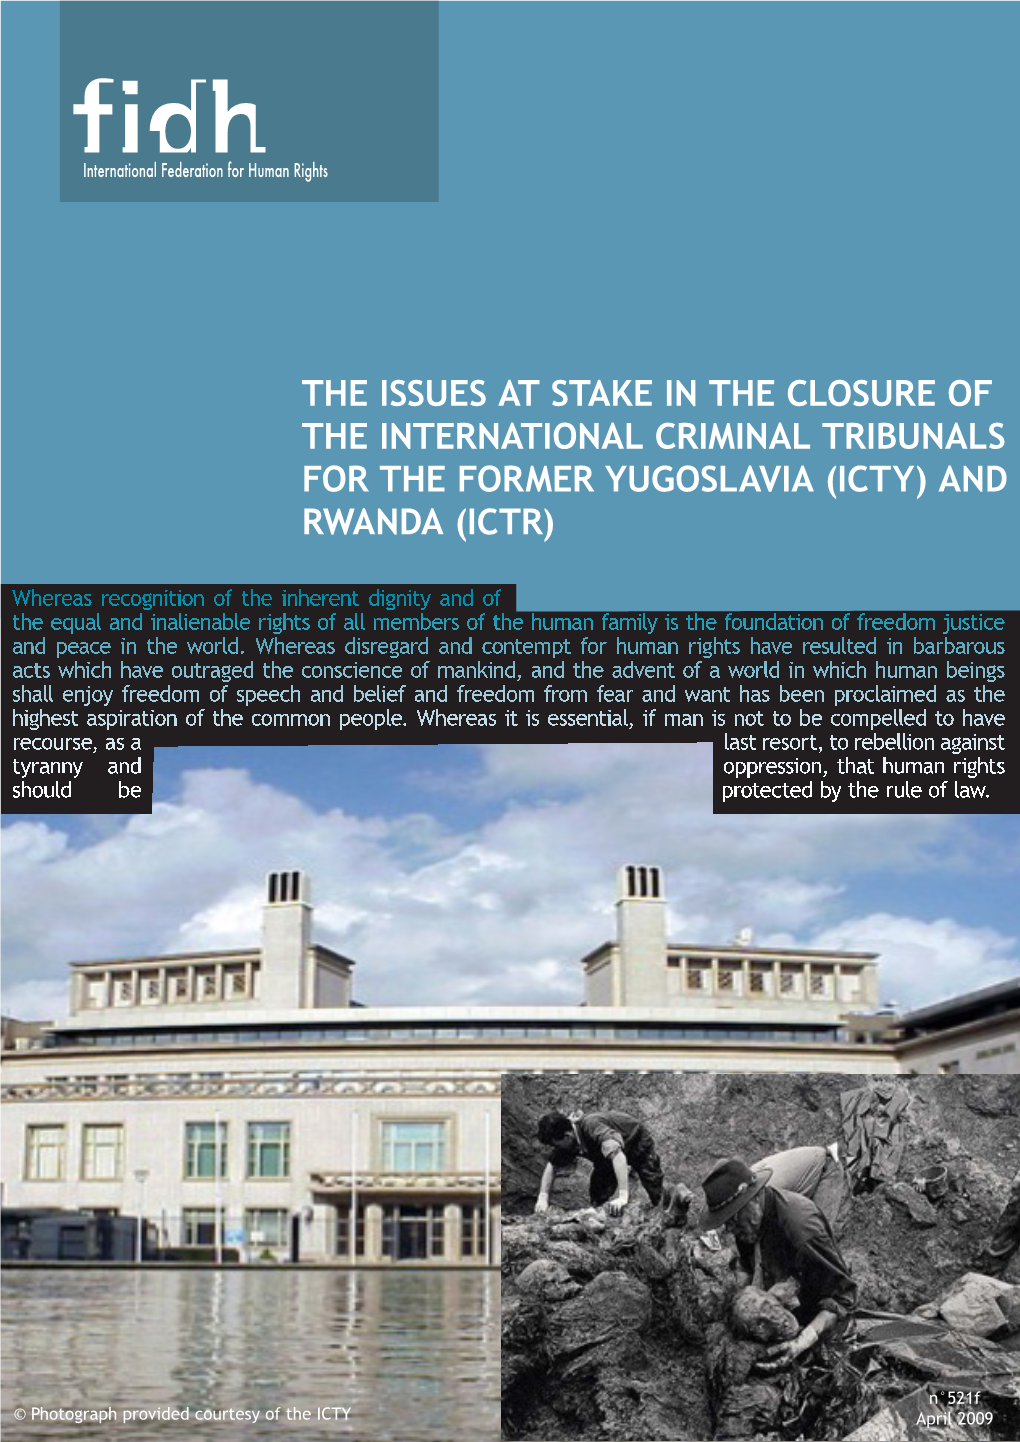 The Issues at Stake in the Closure of the International Criminal Tribunals for the Former Yugoslavia (Icty) and Rwanda (Ictr)